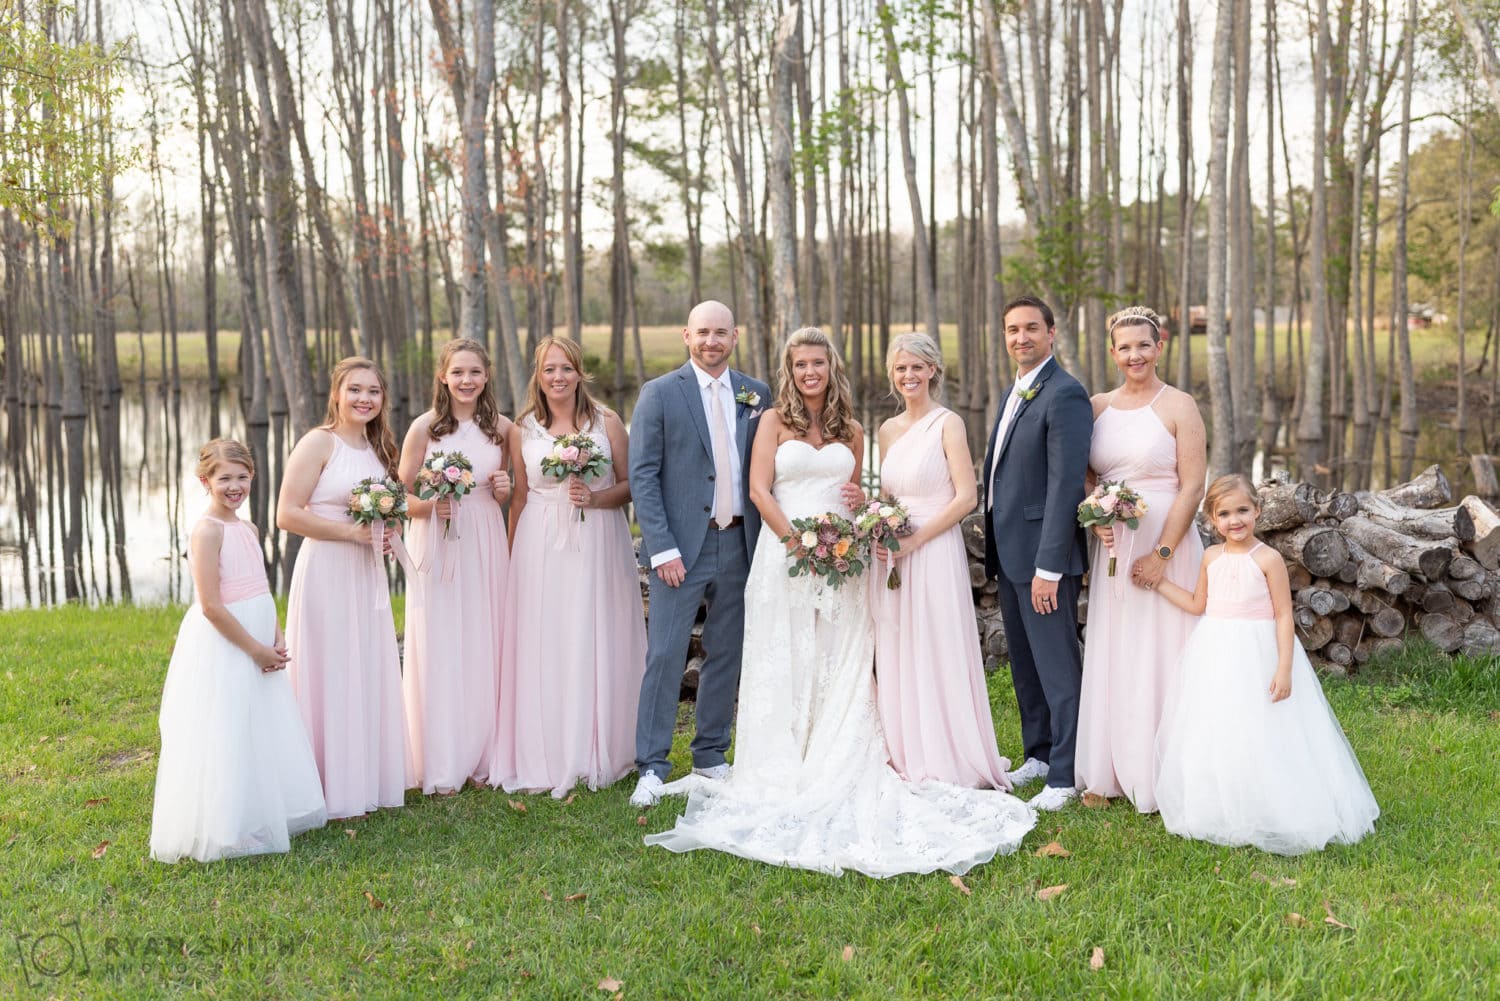 Bridesmaids with just one groomsman  - Wildhorse at Parker Farms